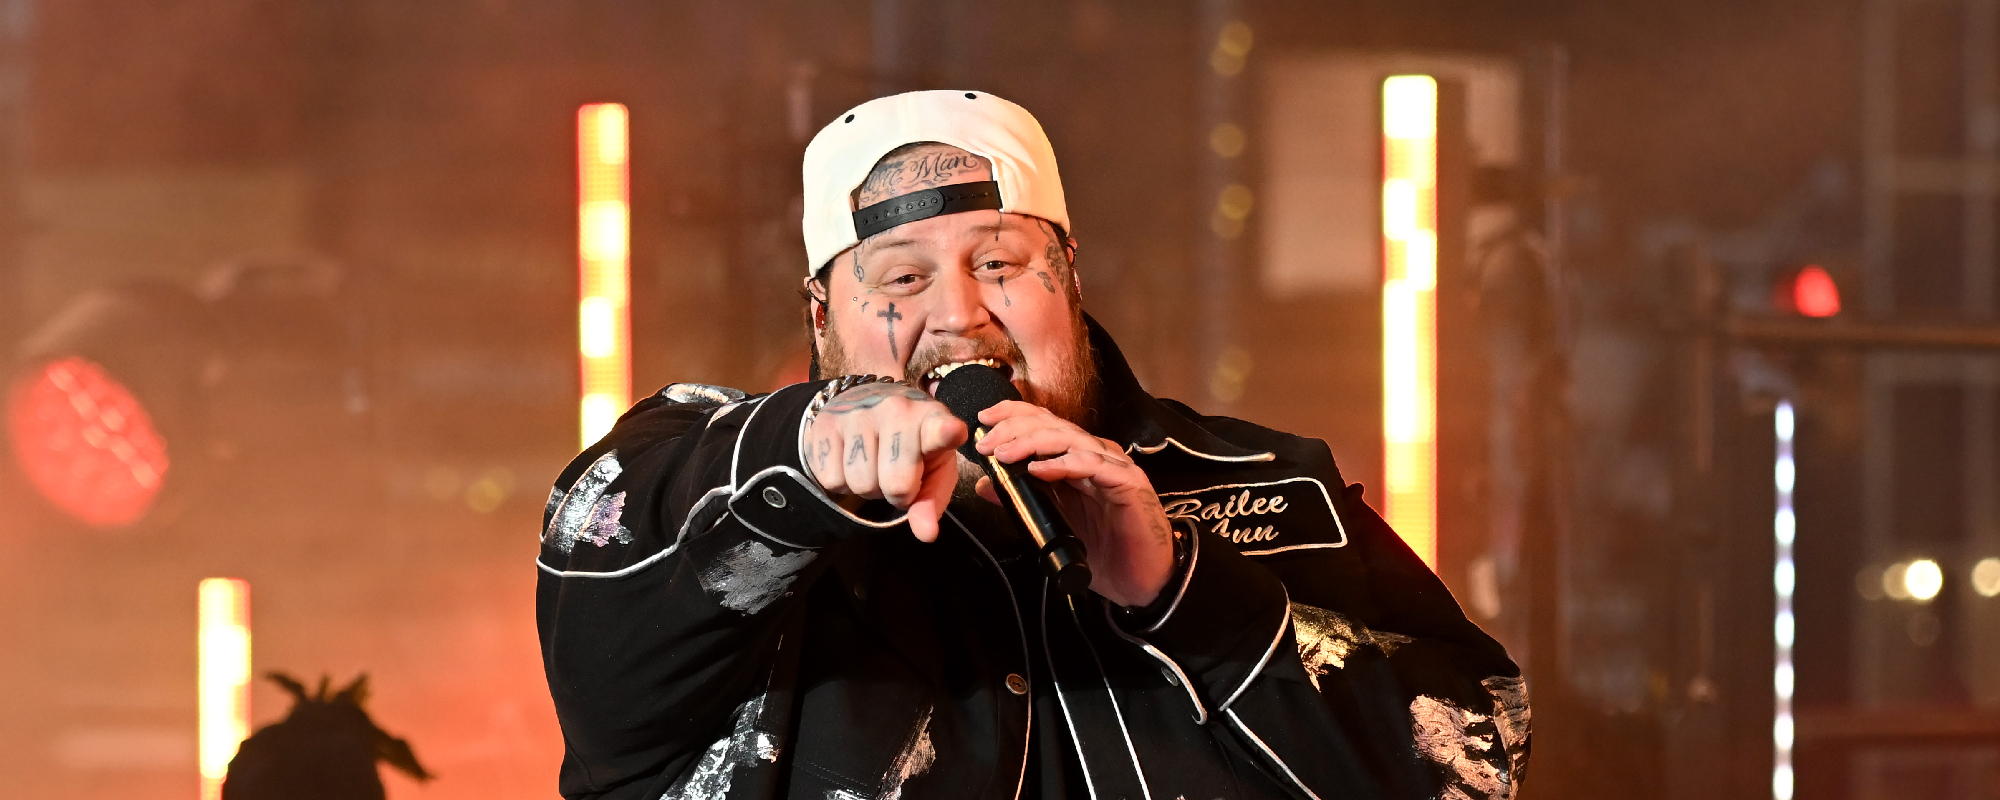 Fans Are Convinced Jelly Roll Will Be Performing at the Super Bowl: “Calling It Right Now”